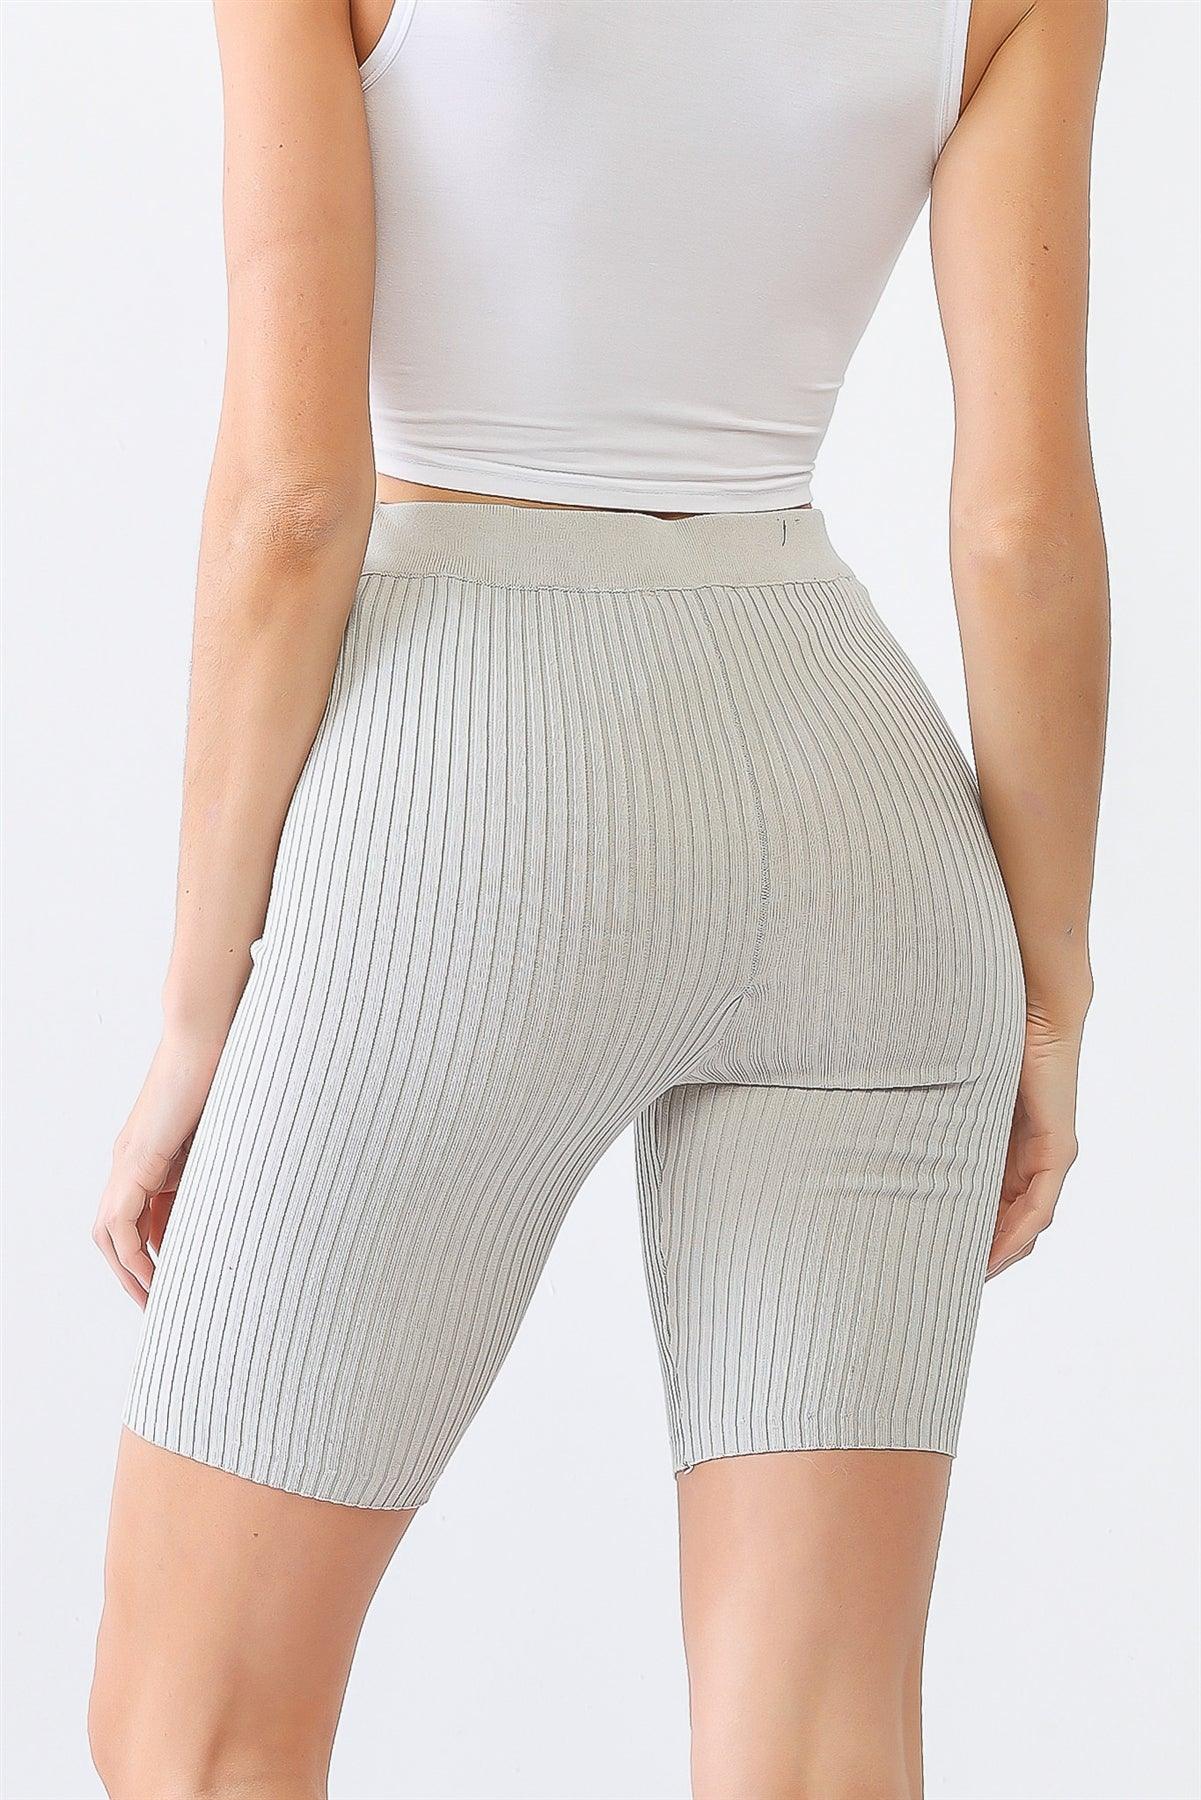 Silver Ribbed High Waist Slim Fit Stretchy Shorts /3-2-1